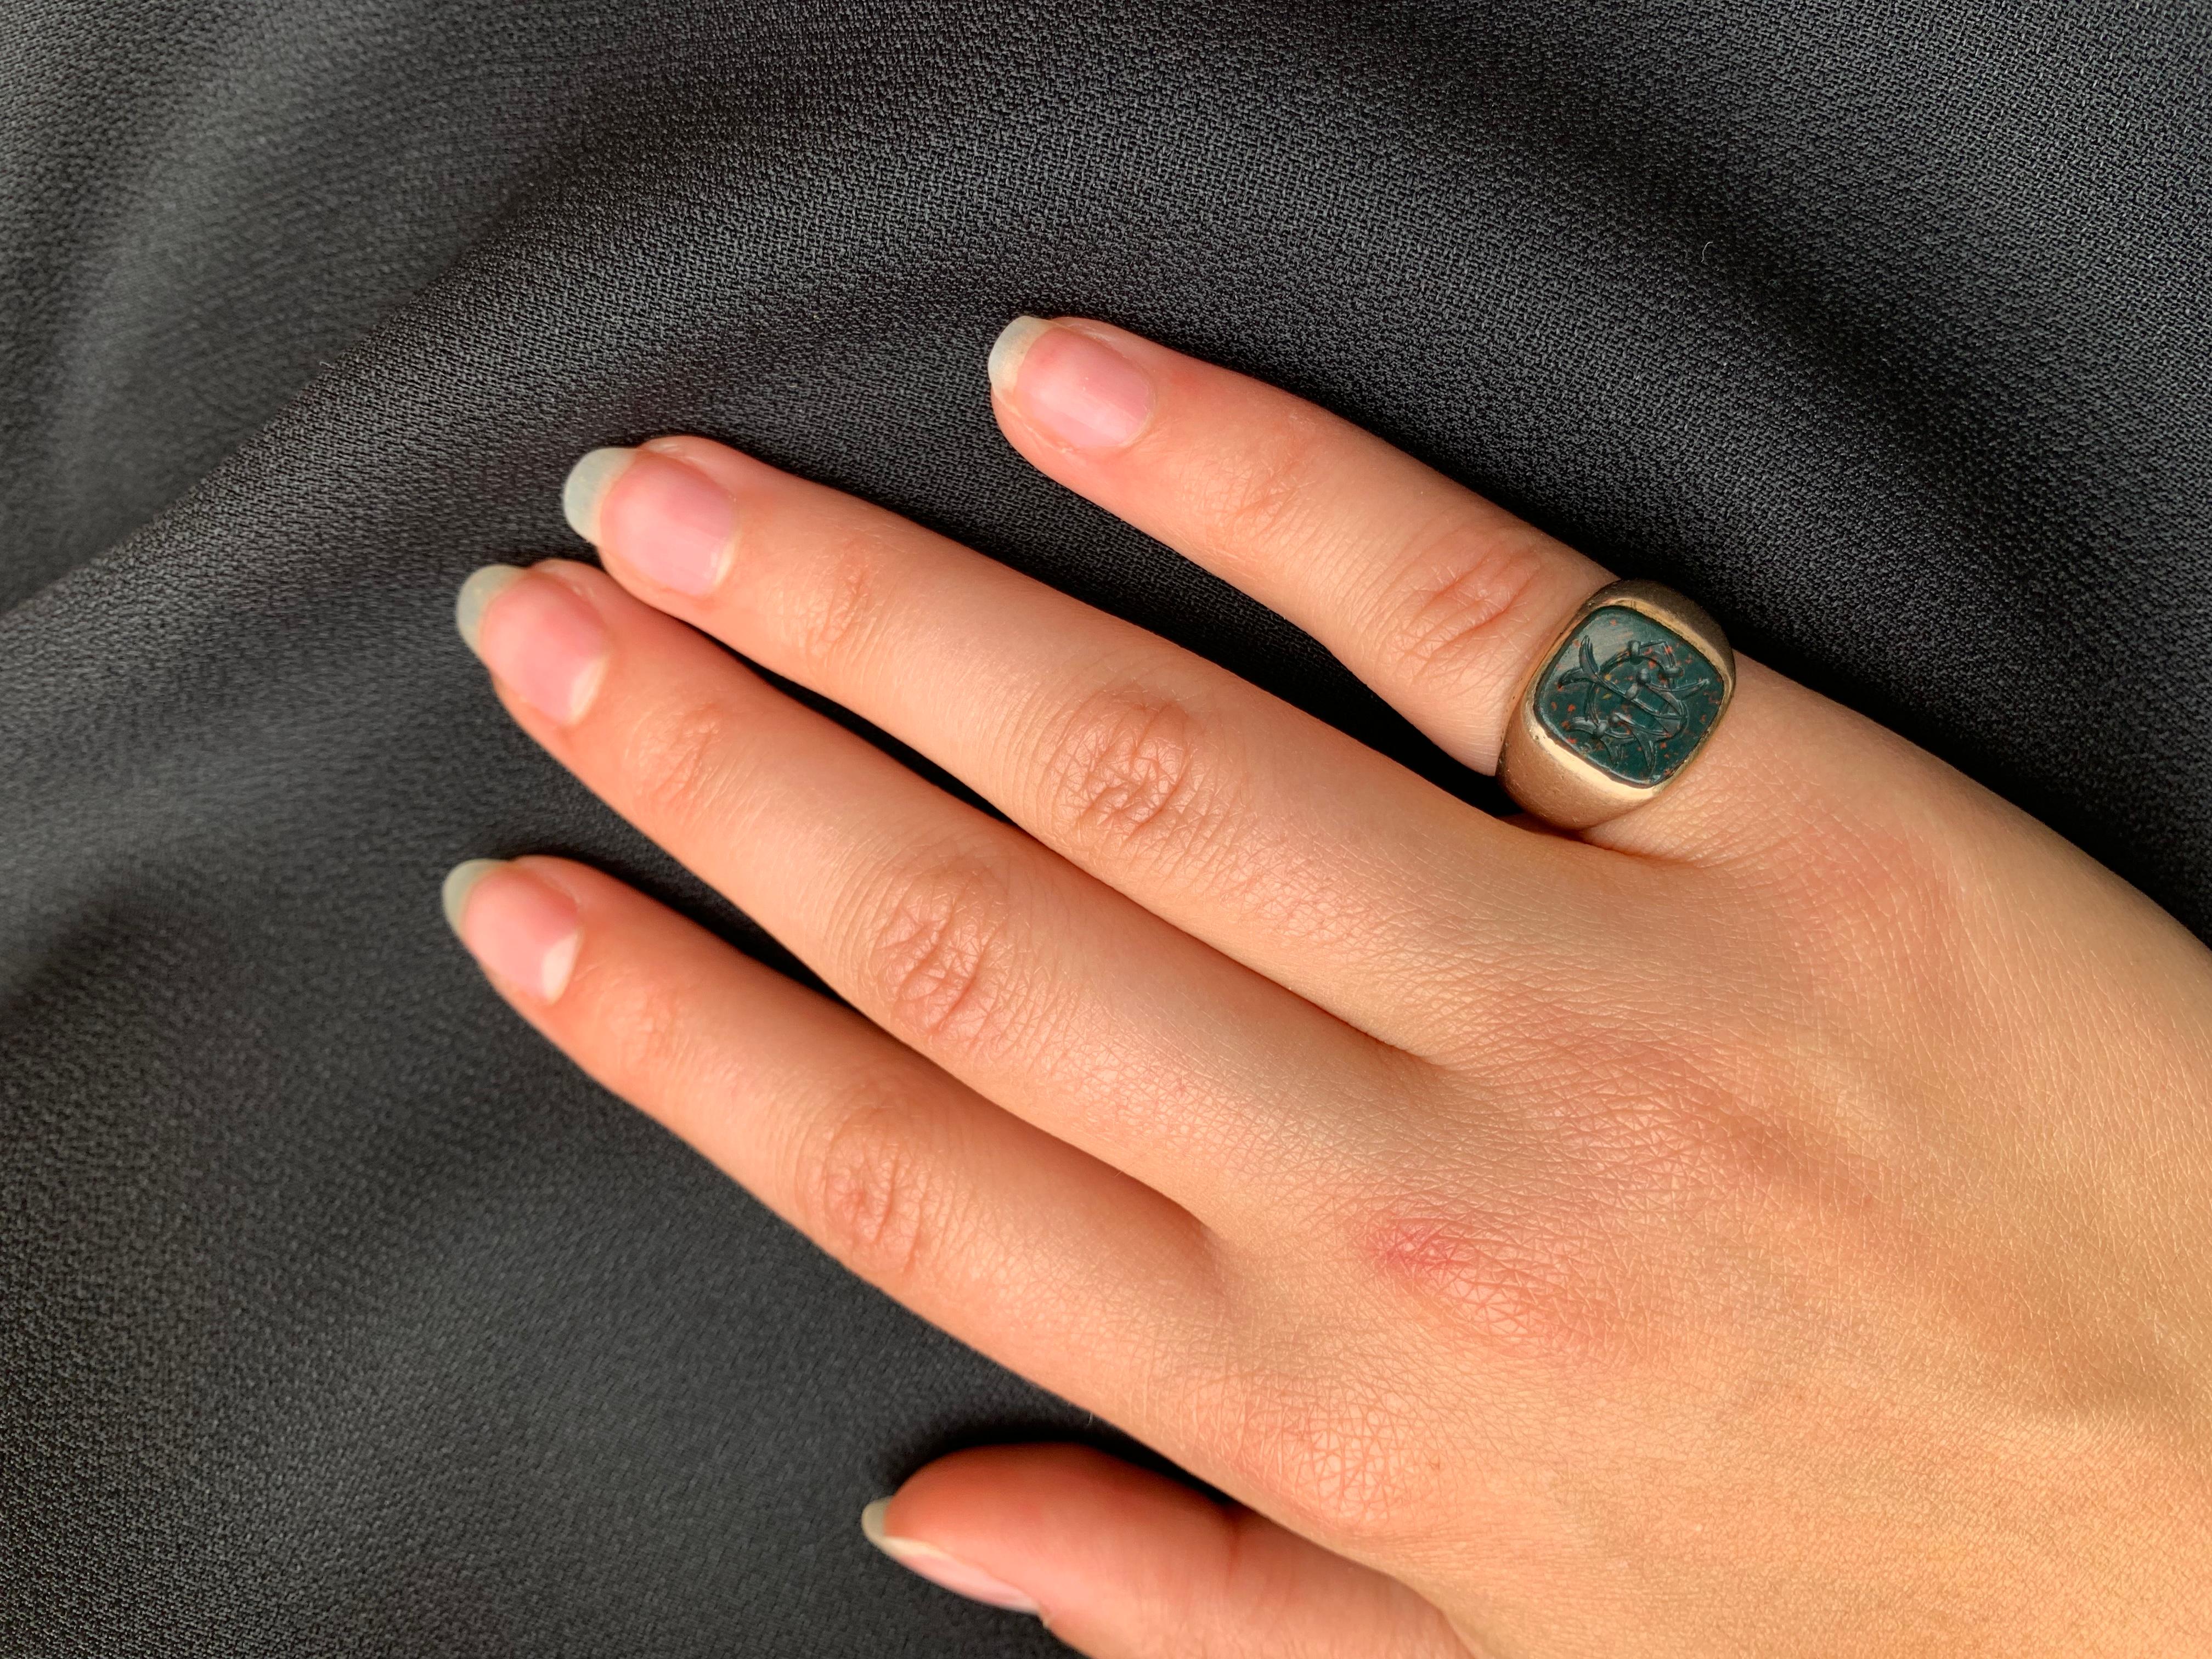 Classic Georgian style antique bloodstone intaglio and 9K rose gold signet ring.
Late 19th Century
The bloodstone intaglio of interconnected symbols and the letter W or M, depending on how you choose to wear it, set in a substantial solid rose gold